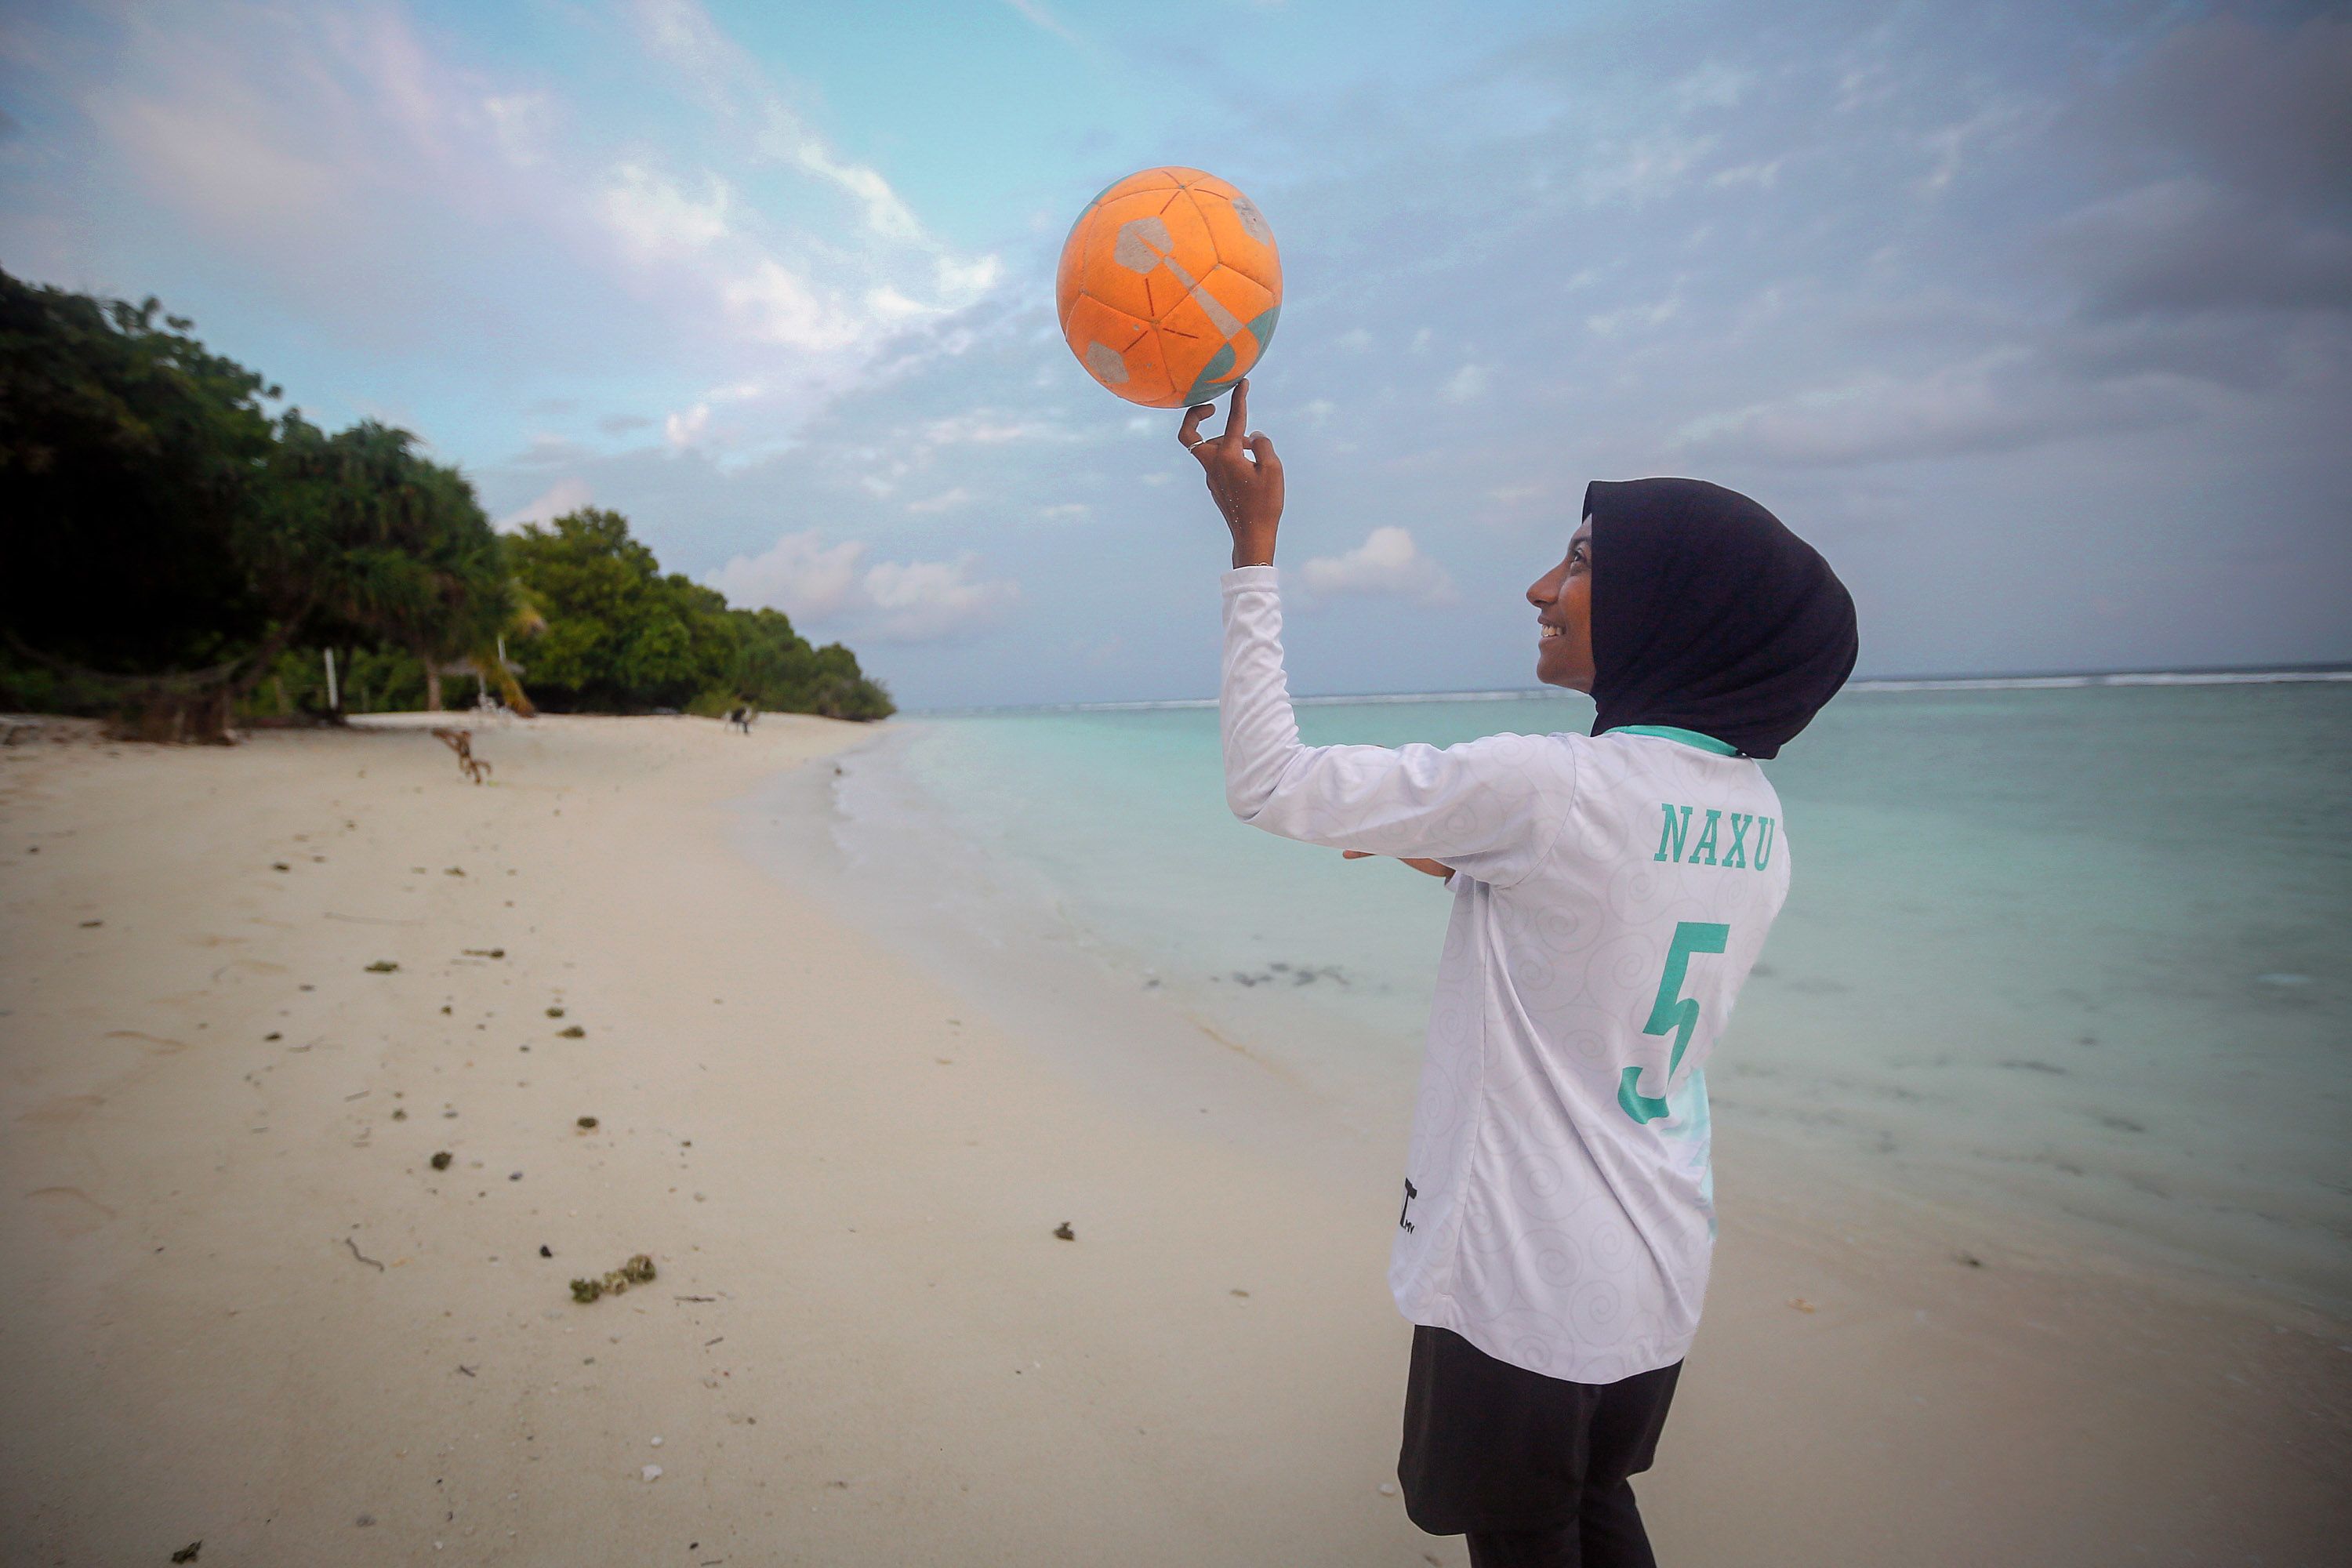 A young girl spinning a basketball on a beach